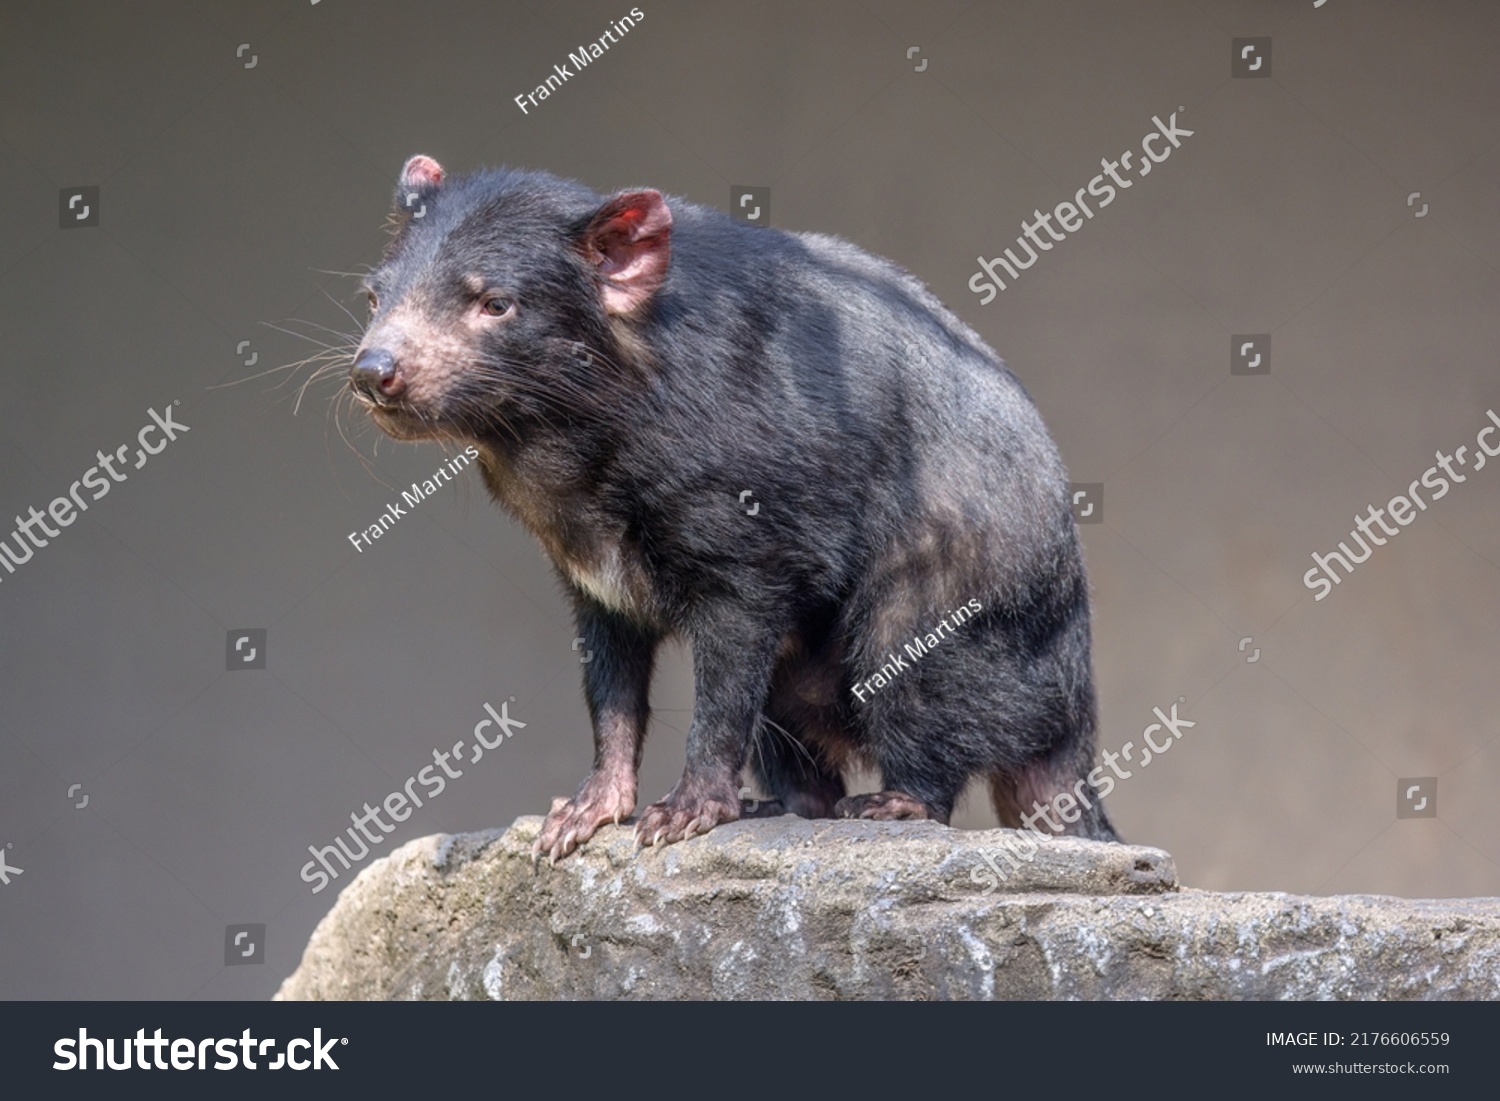 Tasmanian Devil (Sarcophilus harrisii) standing and contemplative. These  native Australian marsupials have been declared an endangered species. They are the world’s largest carnivorous marsupials. #2176606559